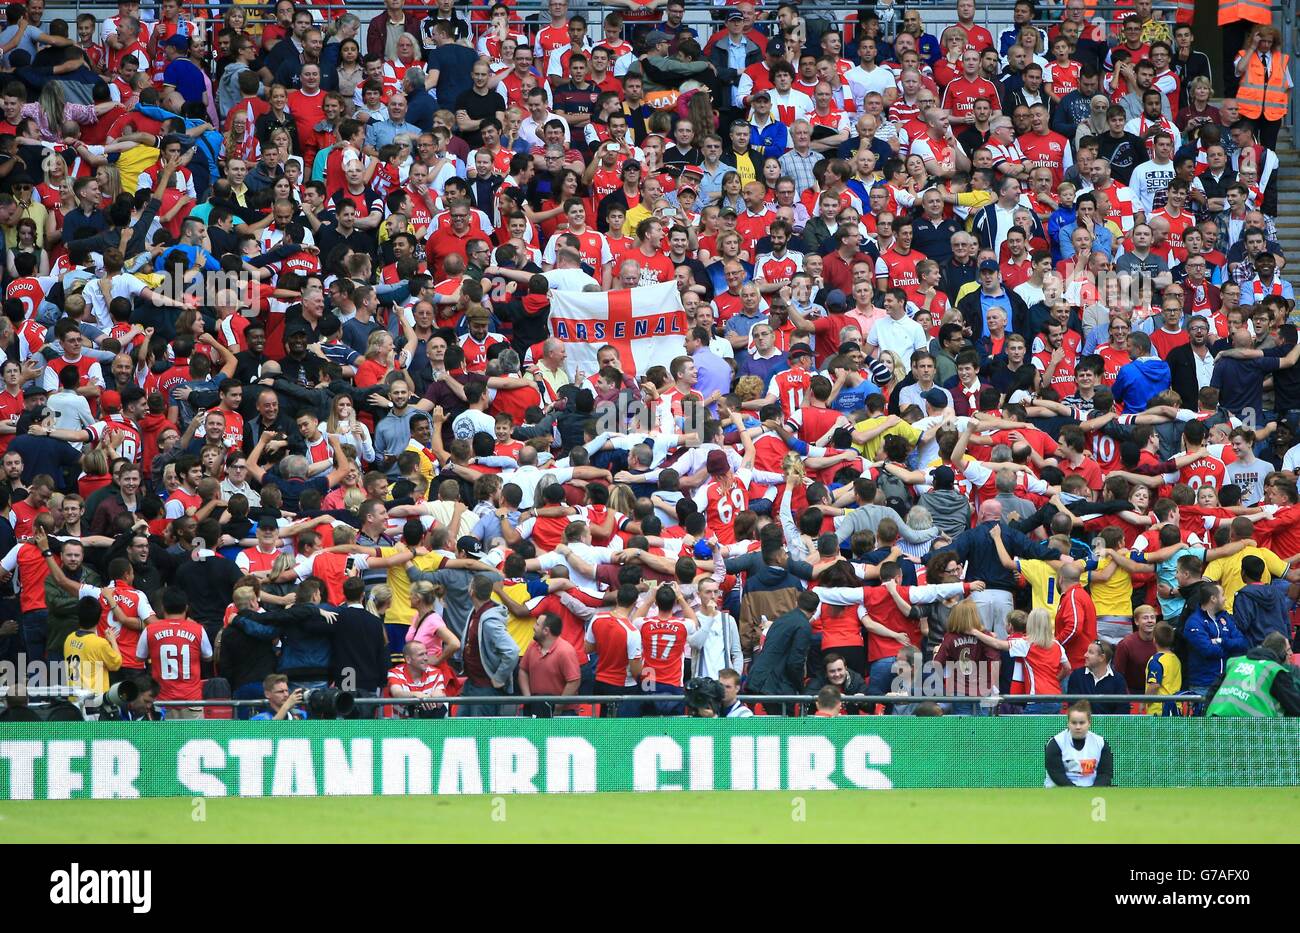 Arsenal fans celebrate by doing the 'Poznan' dance in the stands after their team's third goal during the Community Shield match at Wembley Stadium, London. Stock Photo